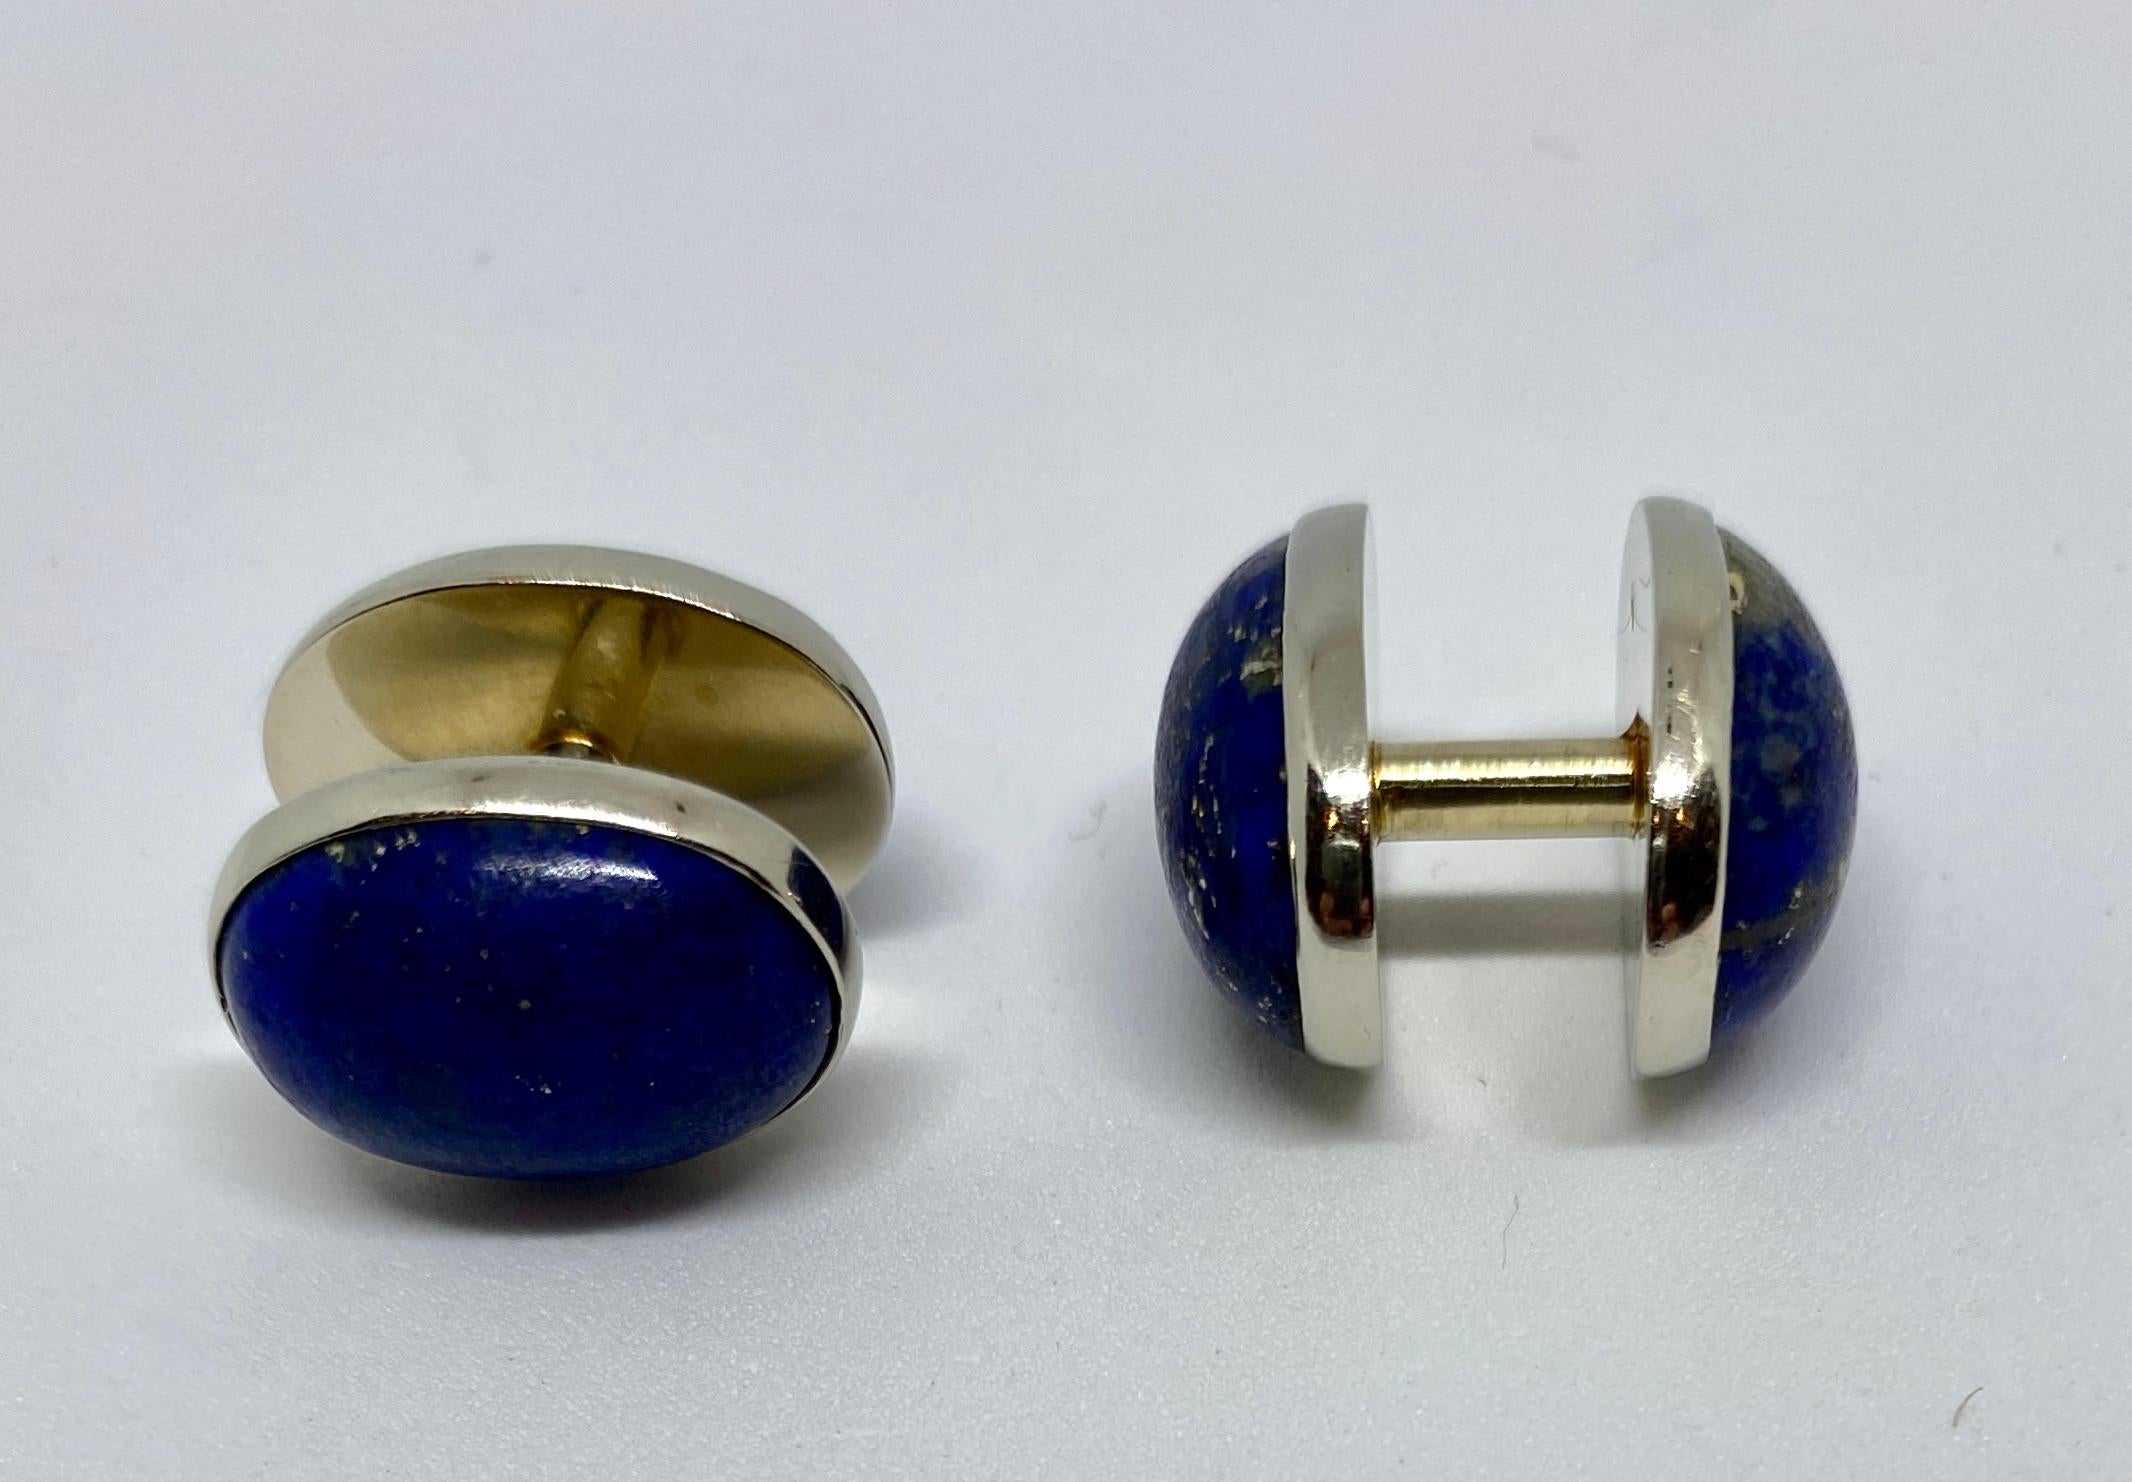 Beautiful, unusually large Art Deco cufflinks in solid 14K white gold with unpolished, oval-shaped lapis cabochons. The spool design was created in the Art Deco period and remains popular for its simplicity and ease of insertion and removal from the